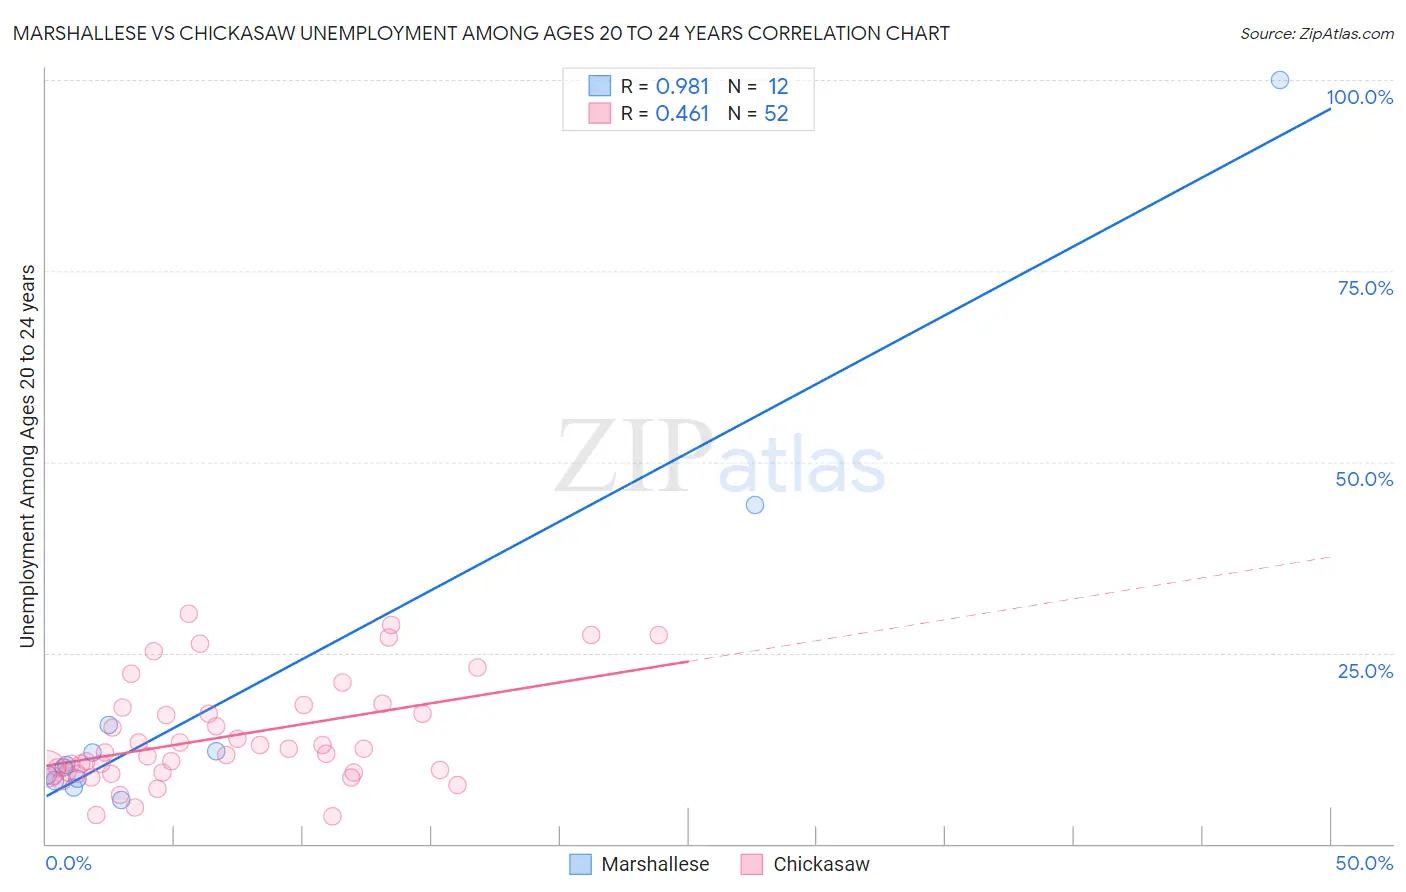 Marshallese vs Chickasaw Unemployment Among Ages 20 to 24 years